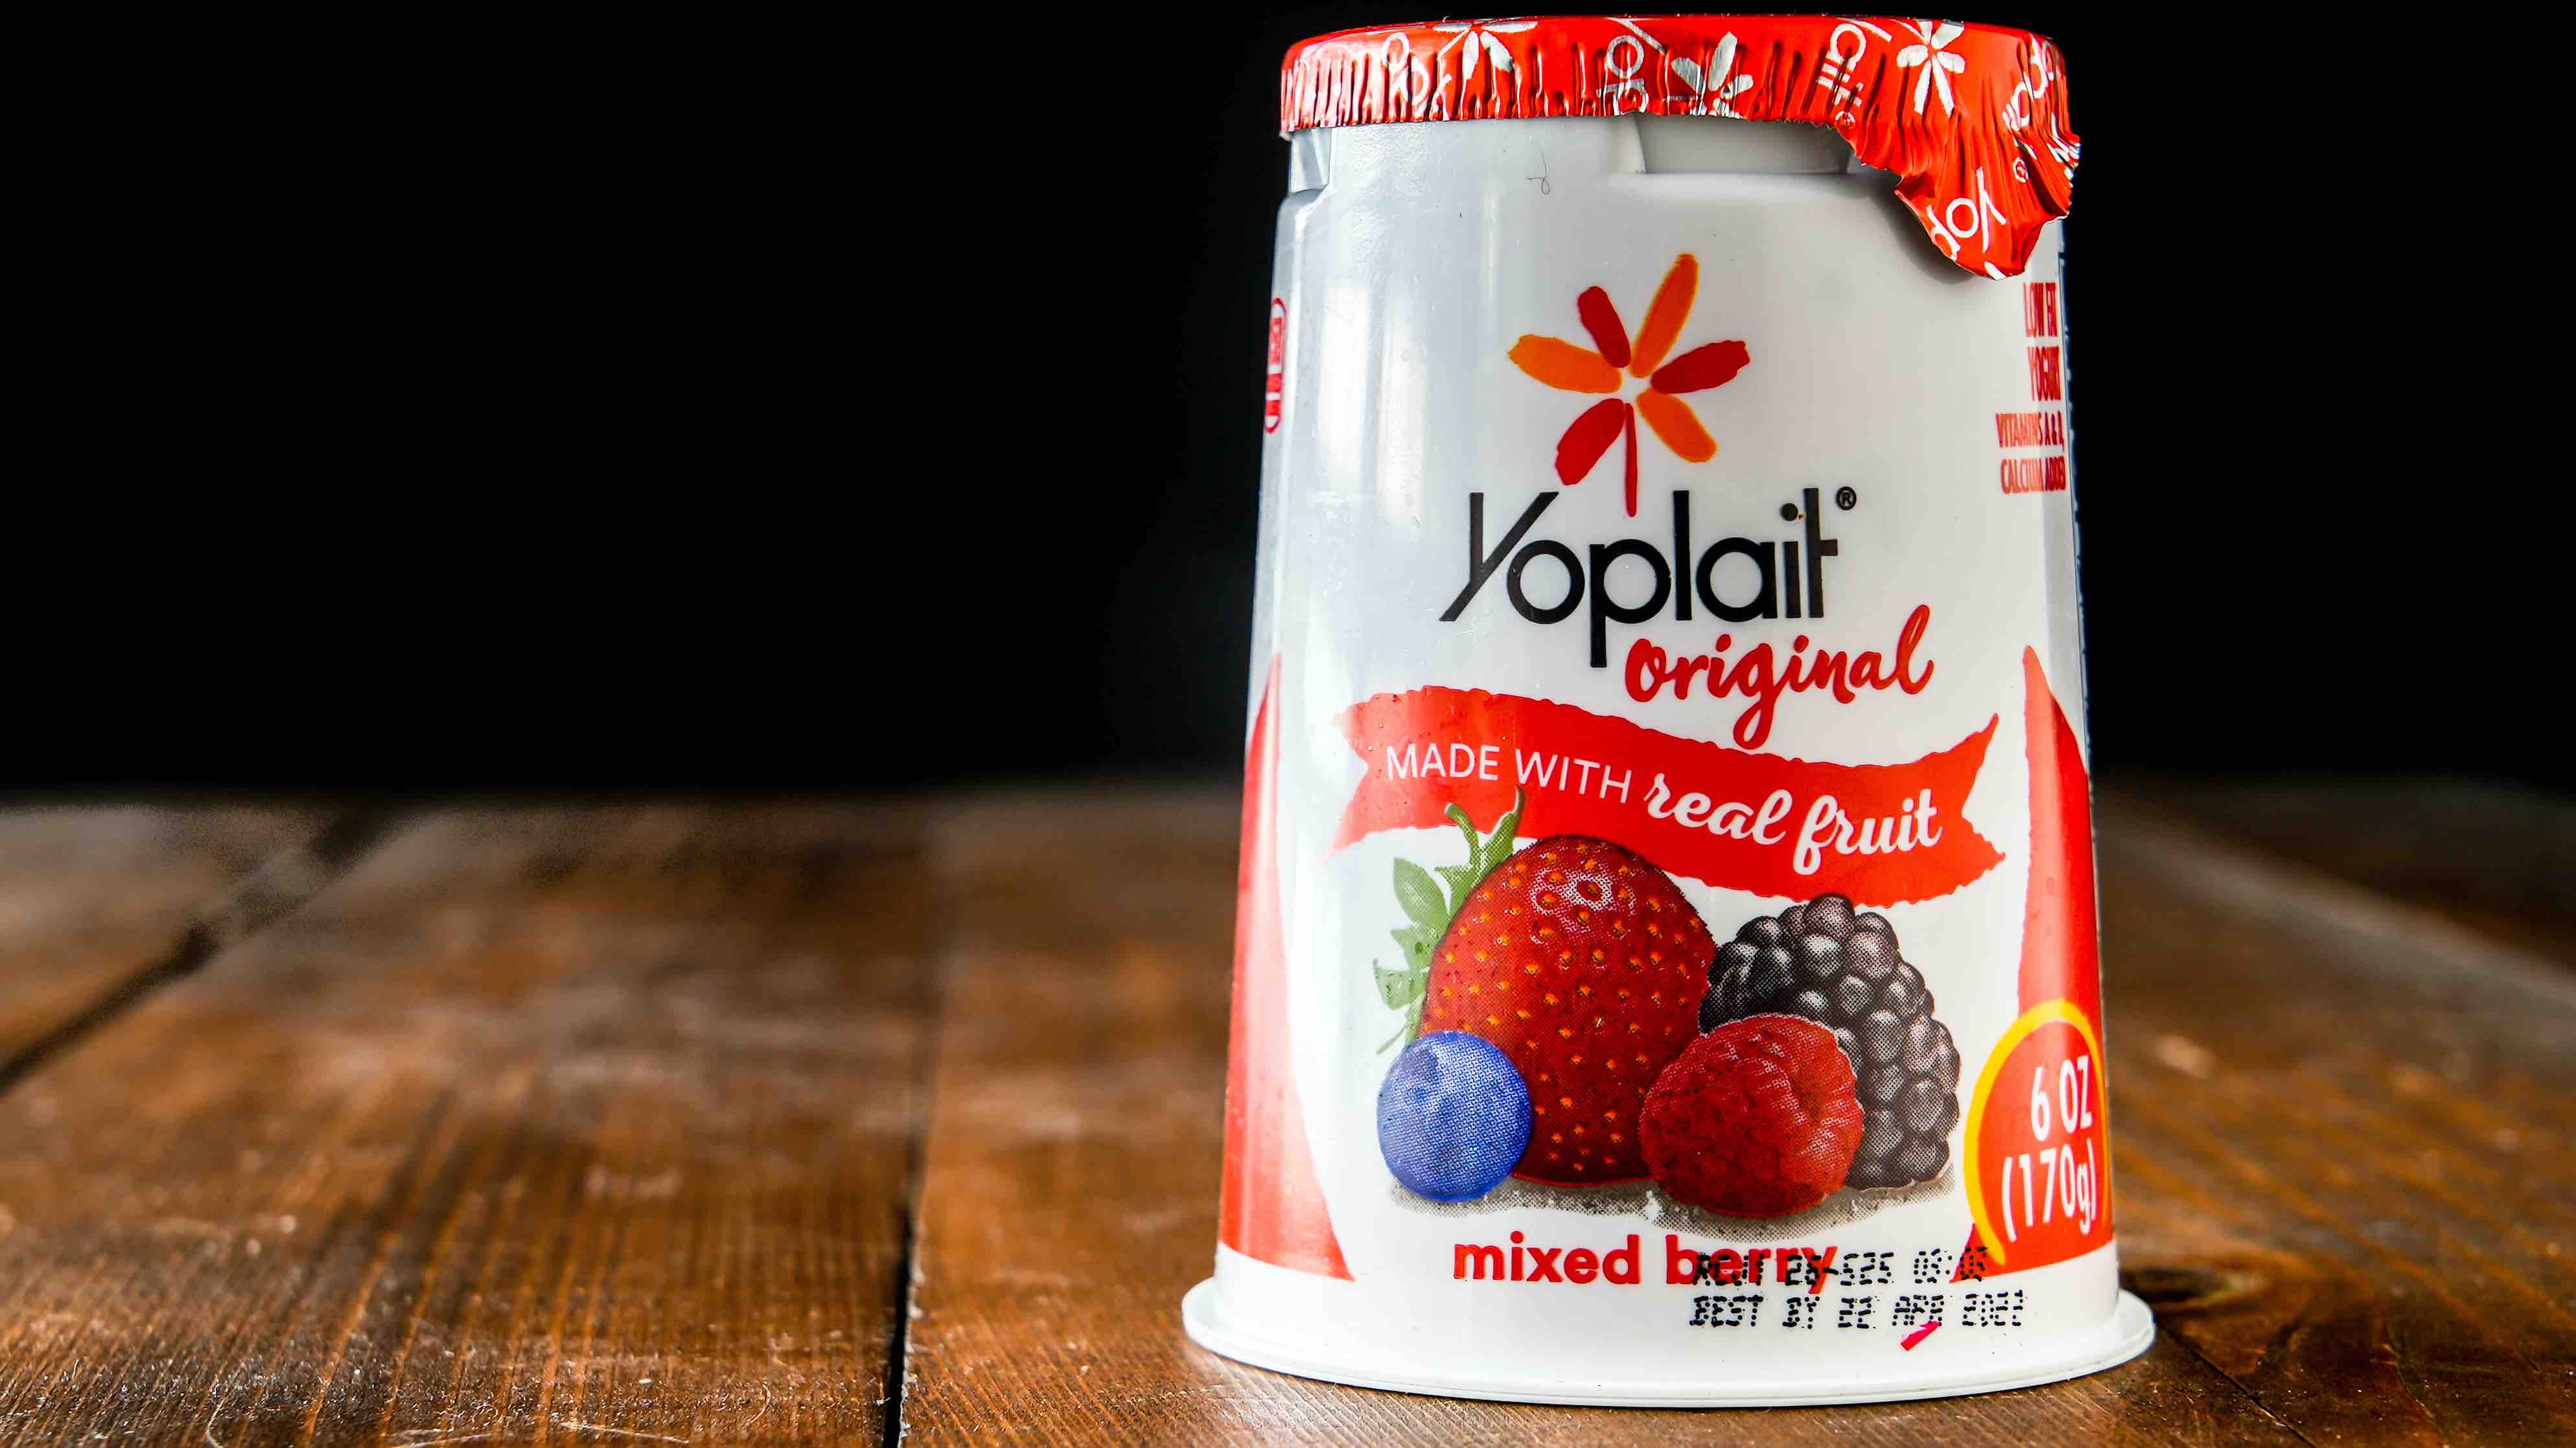 15 Yoplait Yogurt Nutritional Facts That Will Surprise You - Facts.net